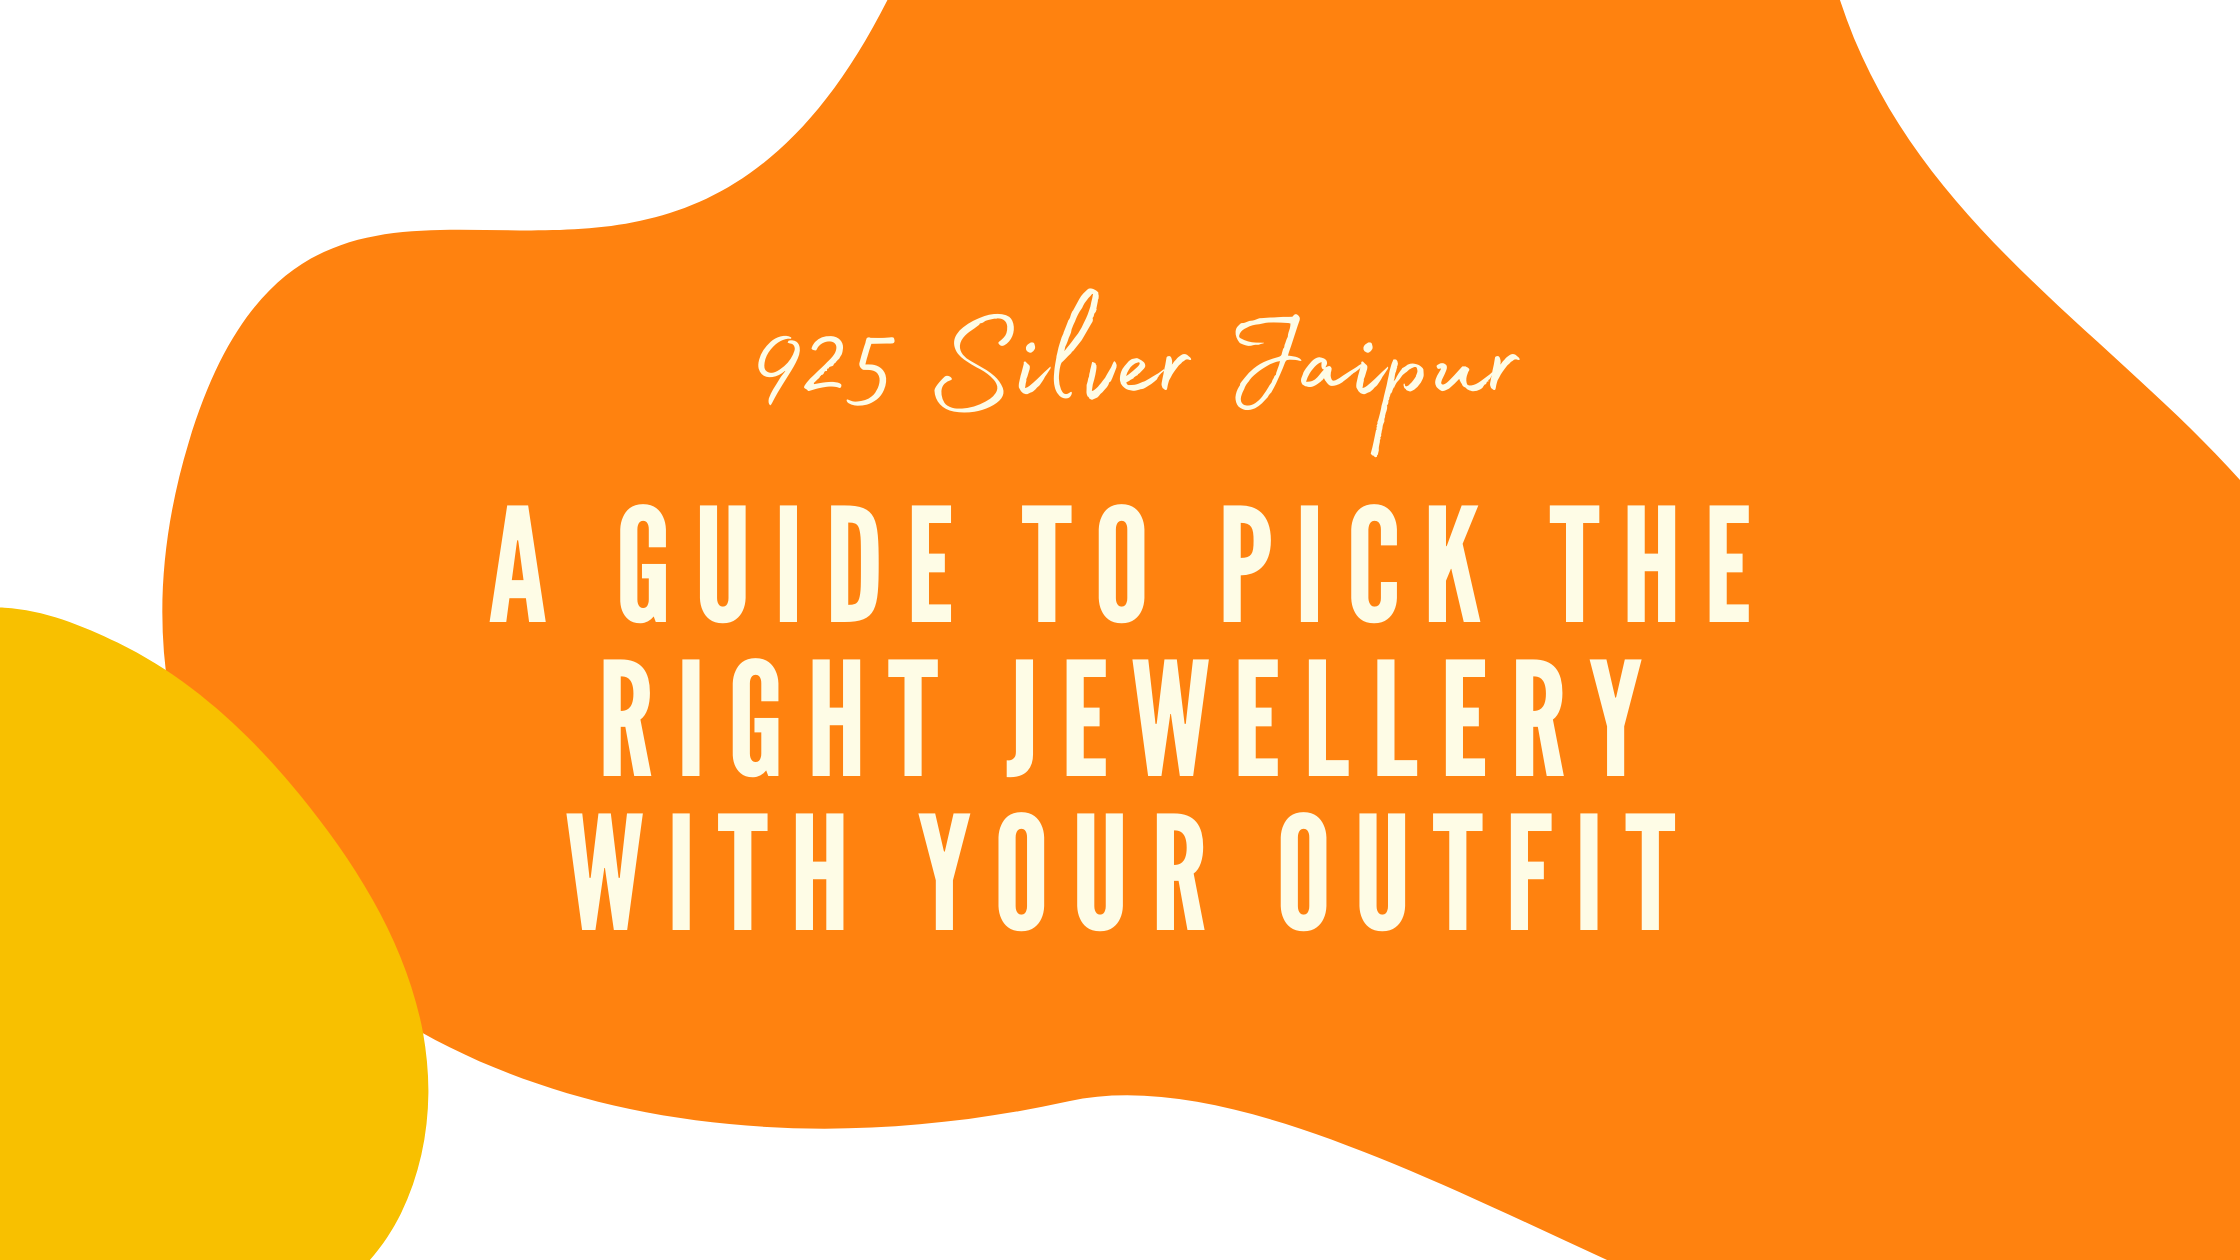 A Guide to Pick the Right Jewellery with Your Outfit